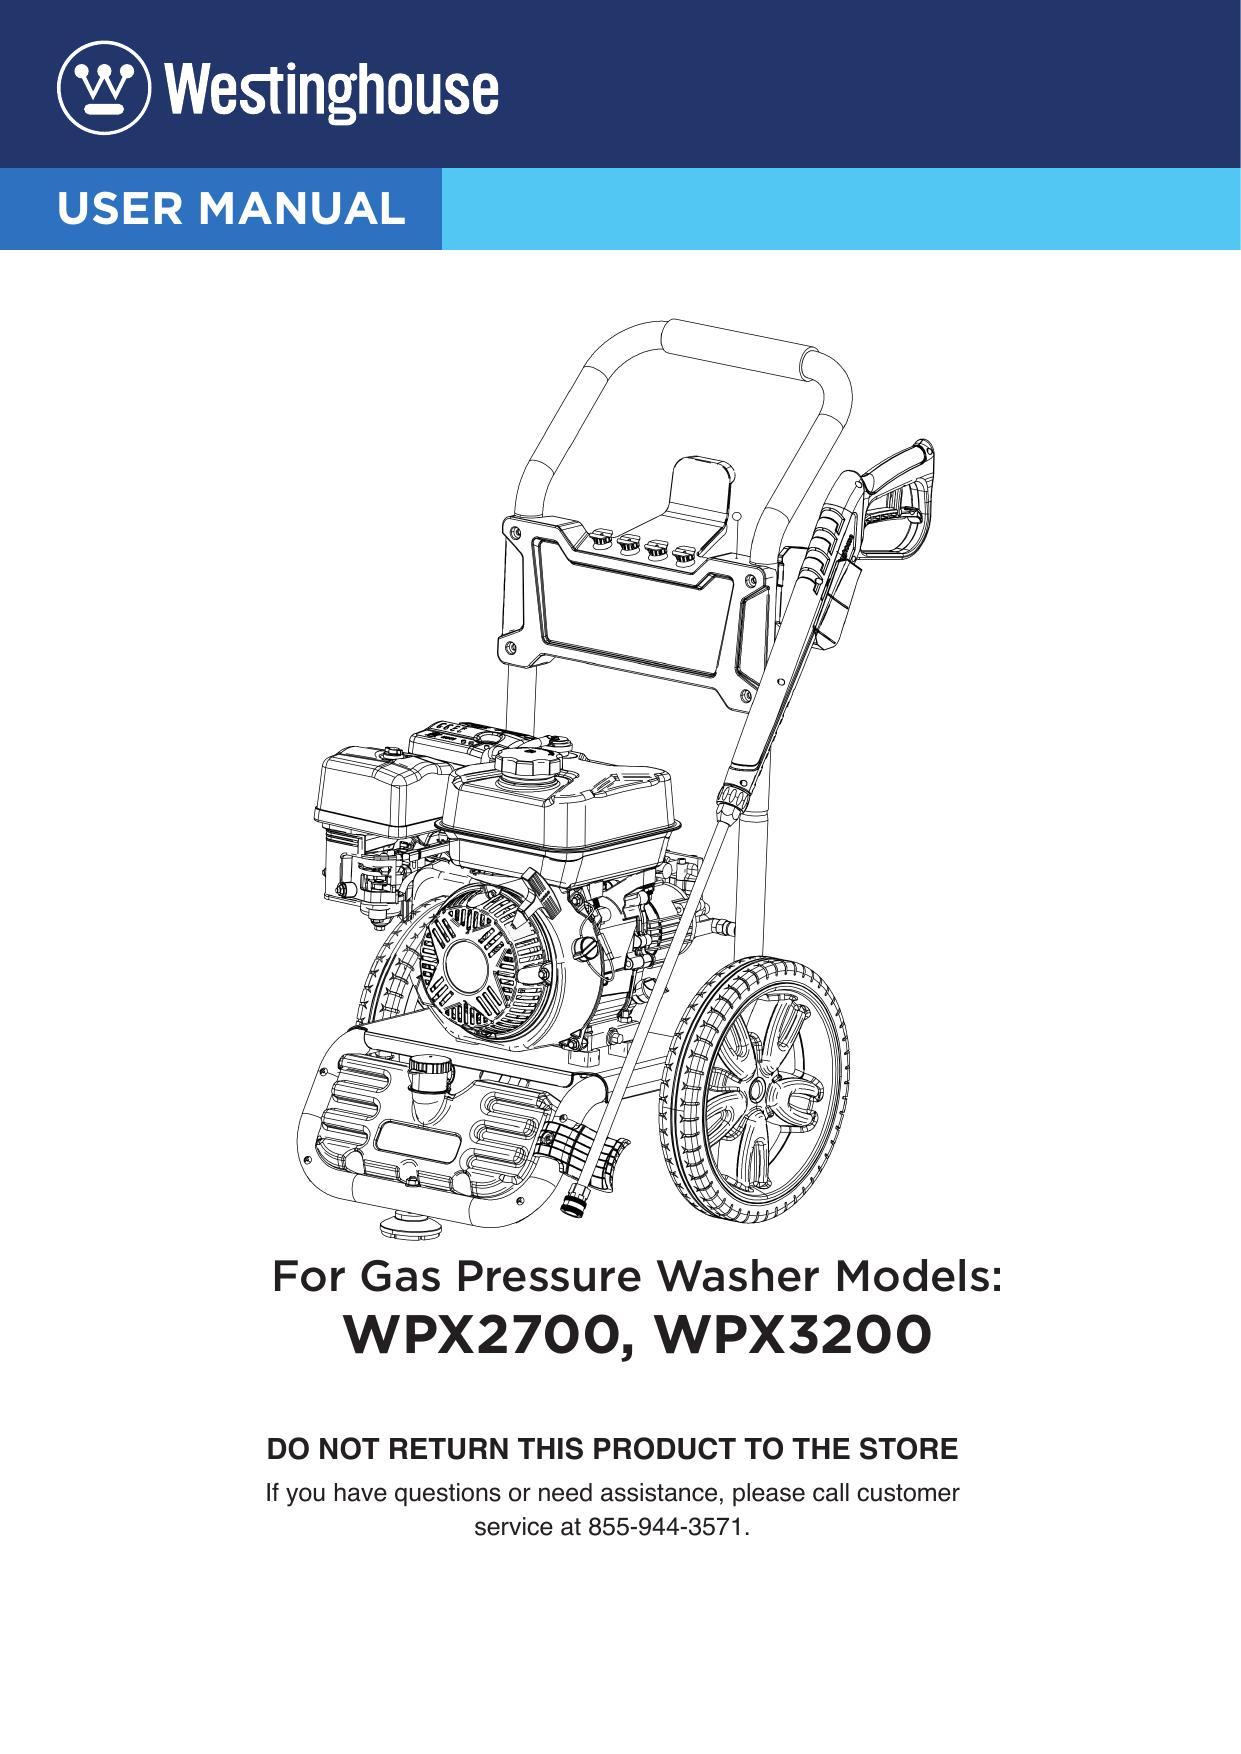 user-manual-for-gas-pressure-washer-models-wpx27o0-wpx32oo.pdf